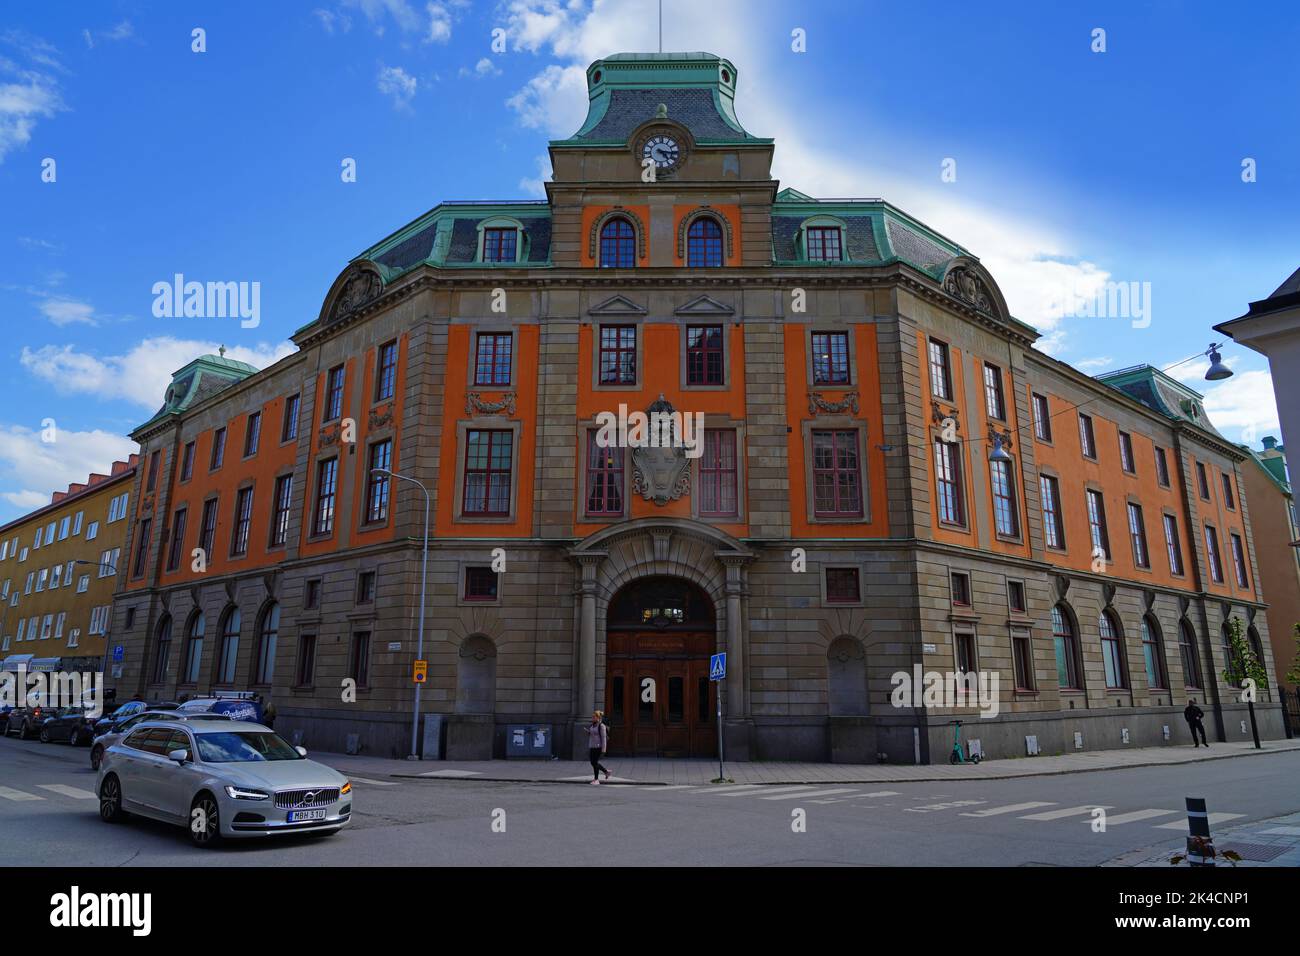 UPPSALA, SWEDEN -1 JUN 2022- View of buildings on the street in downtown Uppsala, a university town in Sweden, on the Fyrisan river. Stock Photo